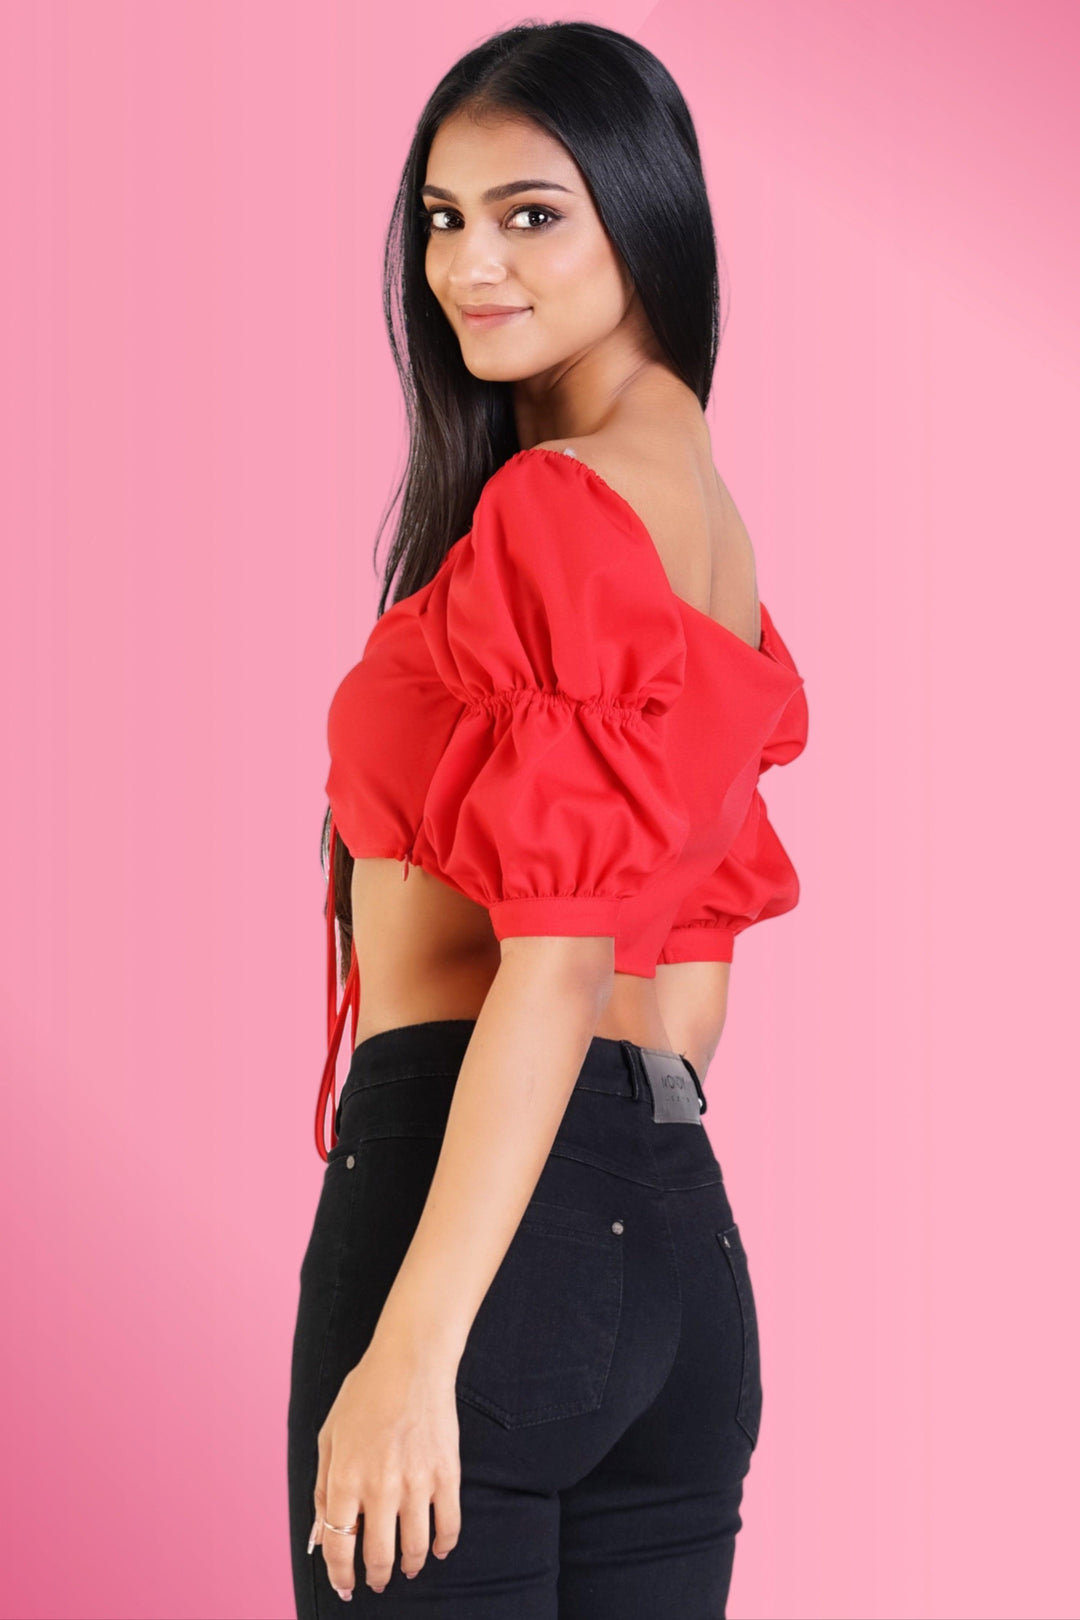 Front Rouched Crop Top - Slim Fit, Top, Evening Top, Holiday, Holiday Tops, Short Sleeves, Slim Fit - MONDY, Sri Lankan women's clothing office wear party dresses jackets pants comfort, style